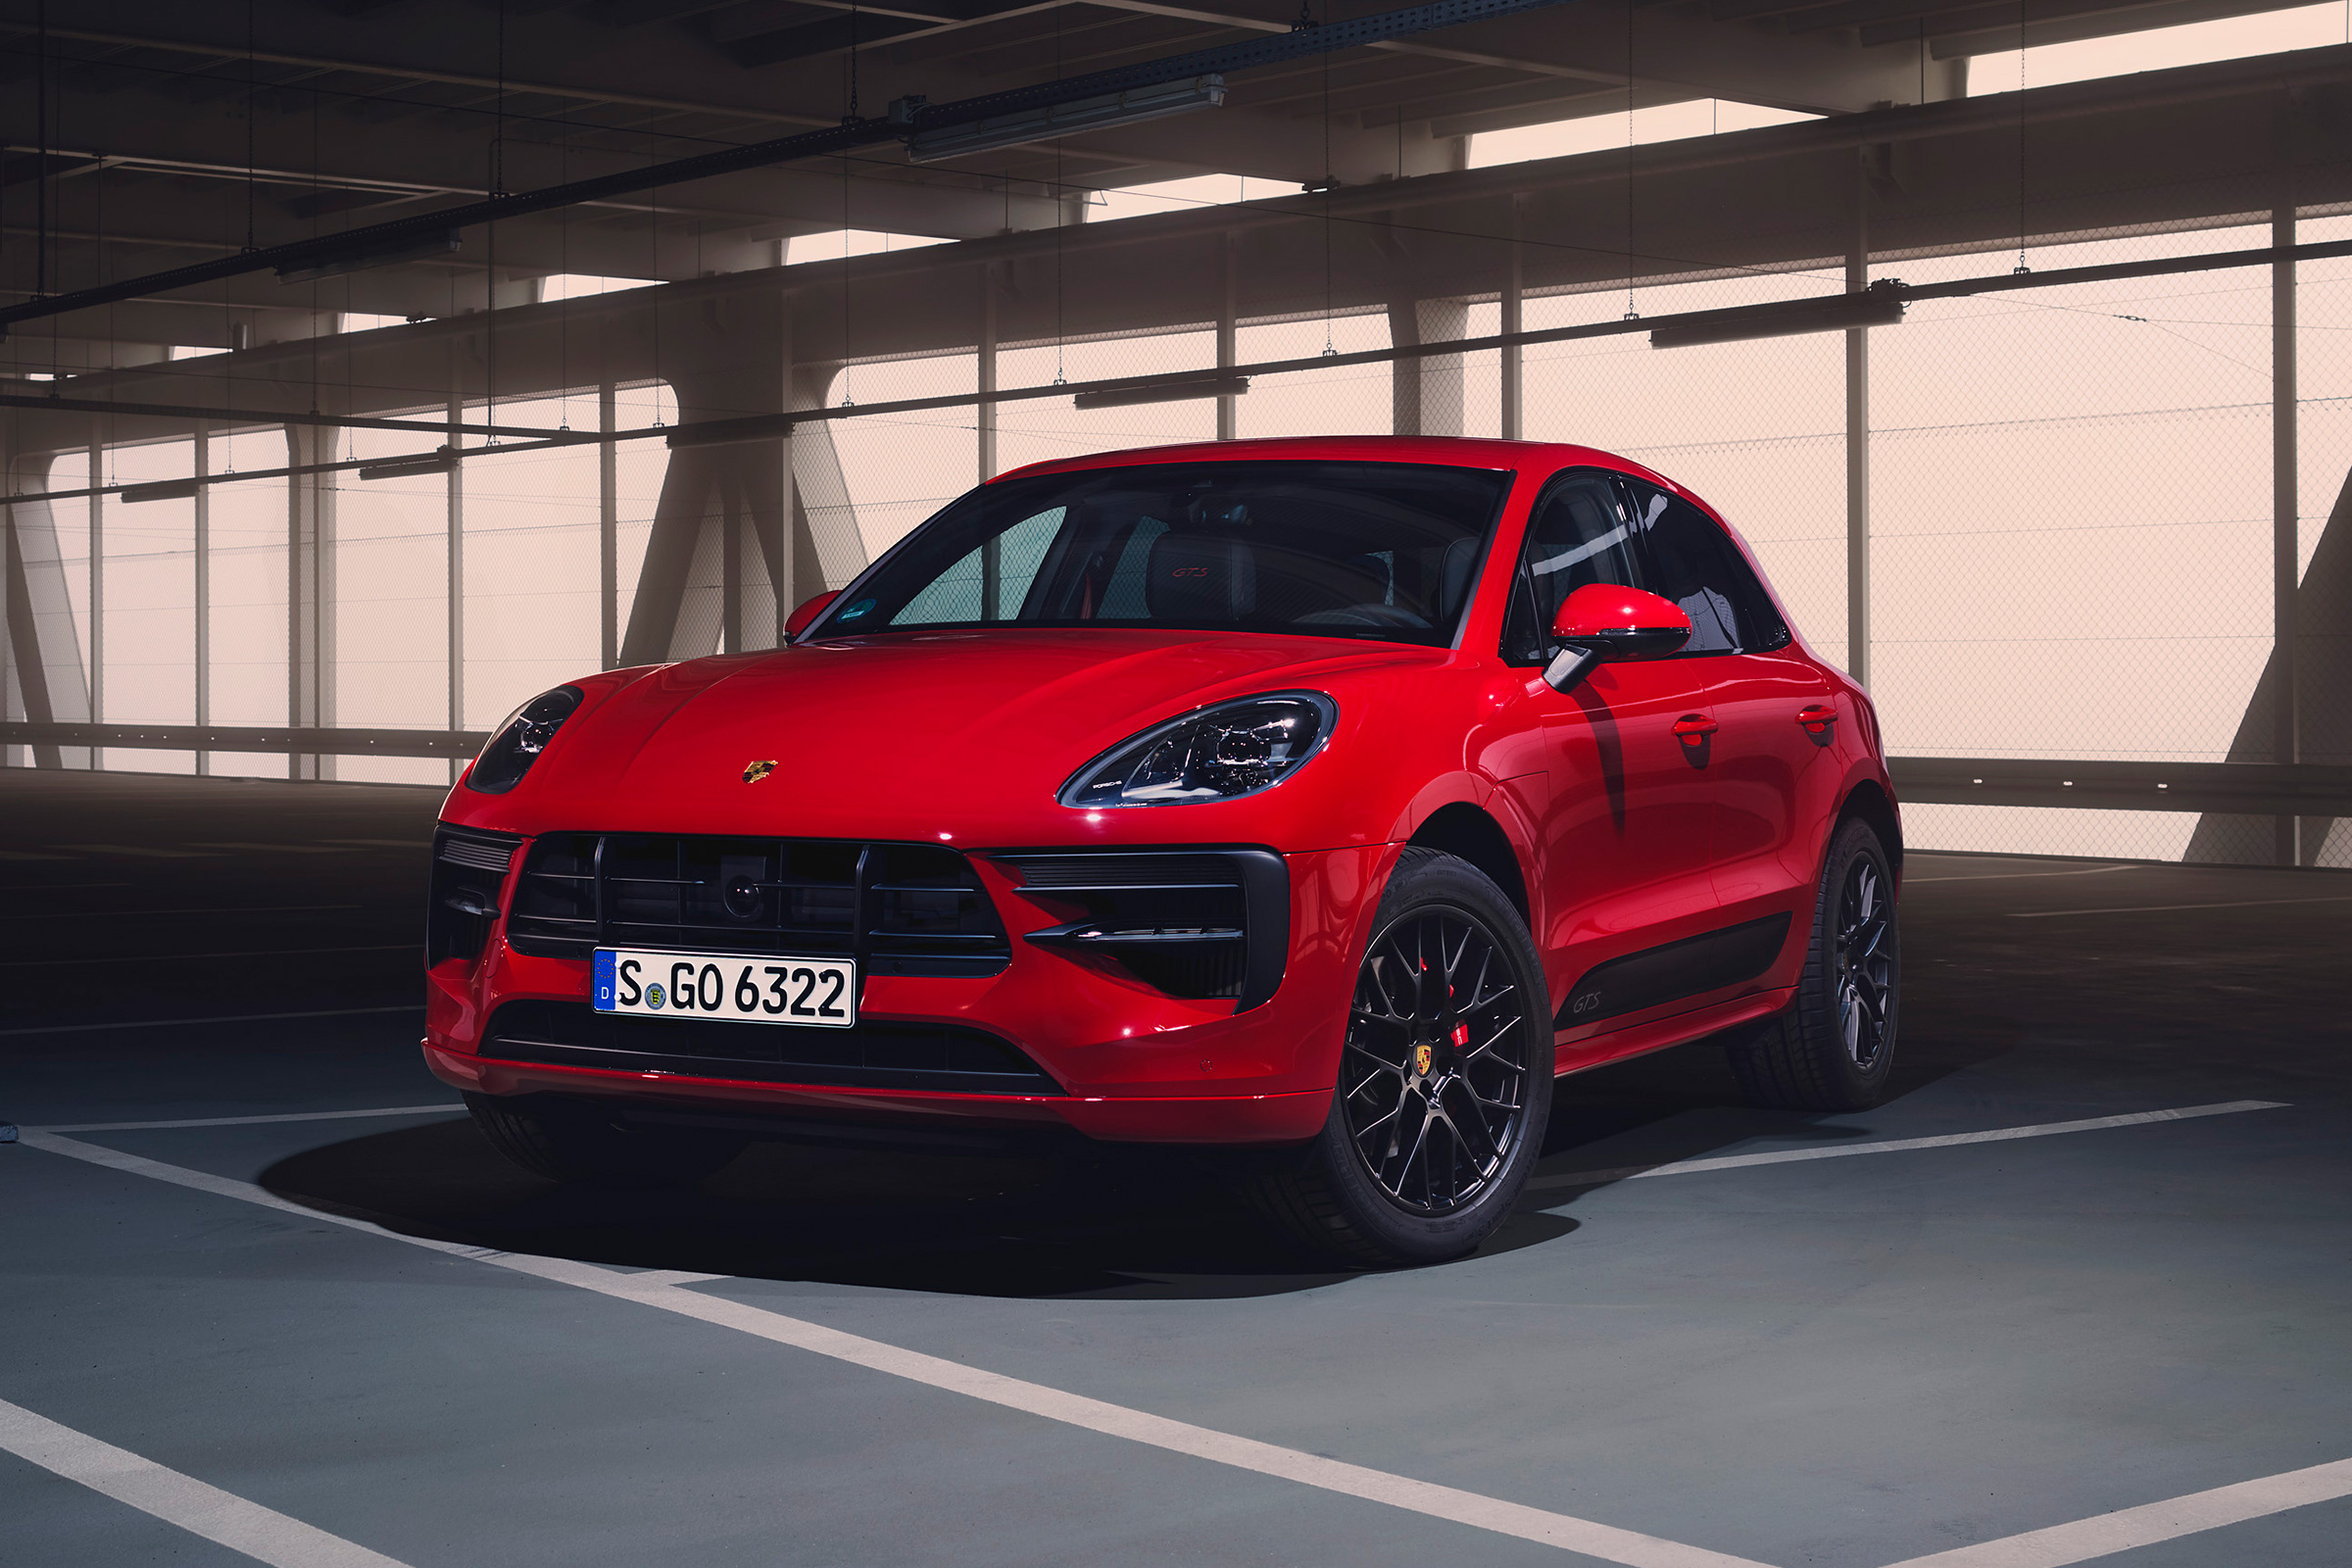 New 375bhp Porsche Macan GTS revealed for 2020 | Auto Express